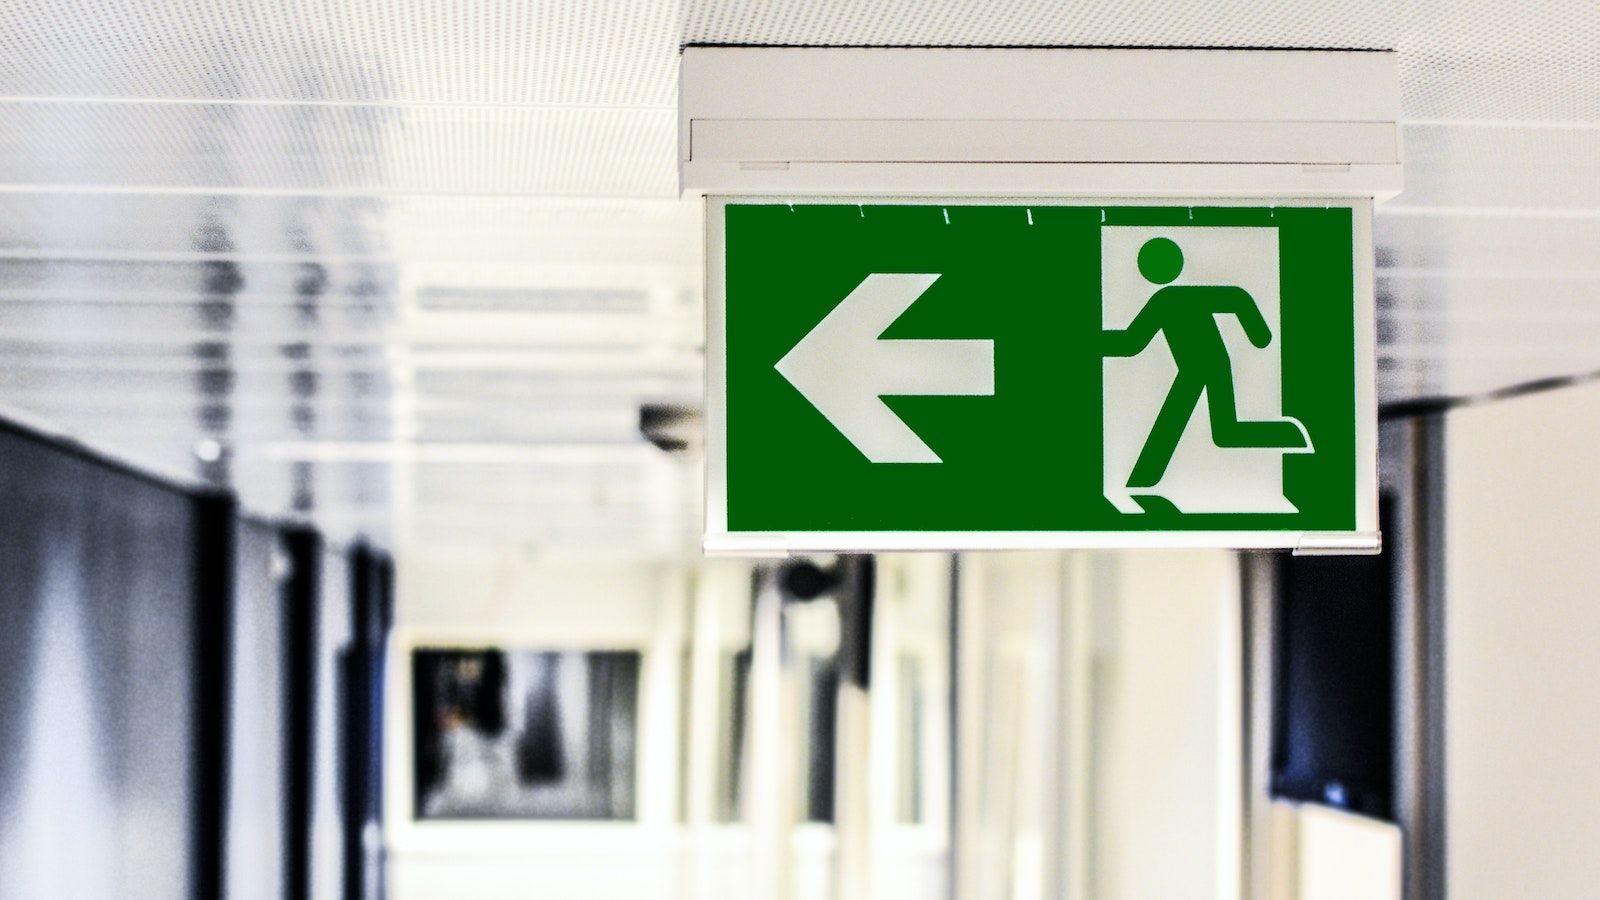 Green and white illuminated fire exit sign erected on a building ceiling banner image